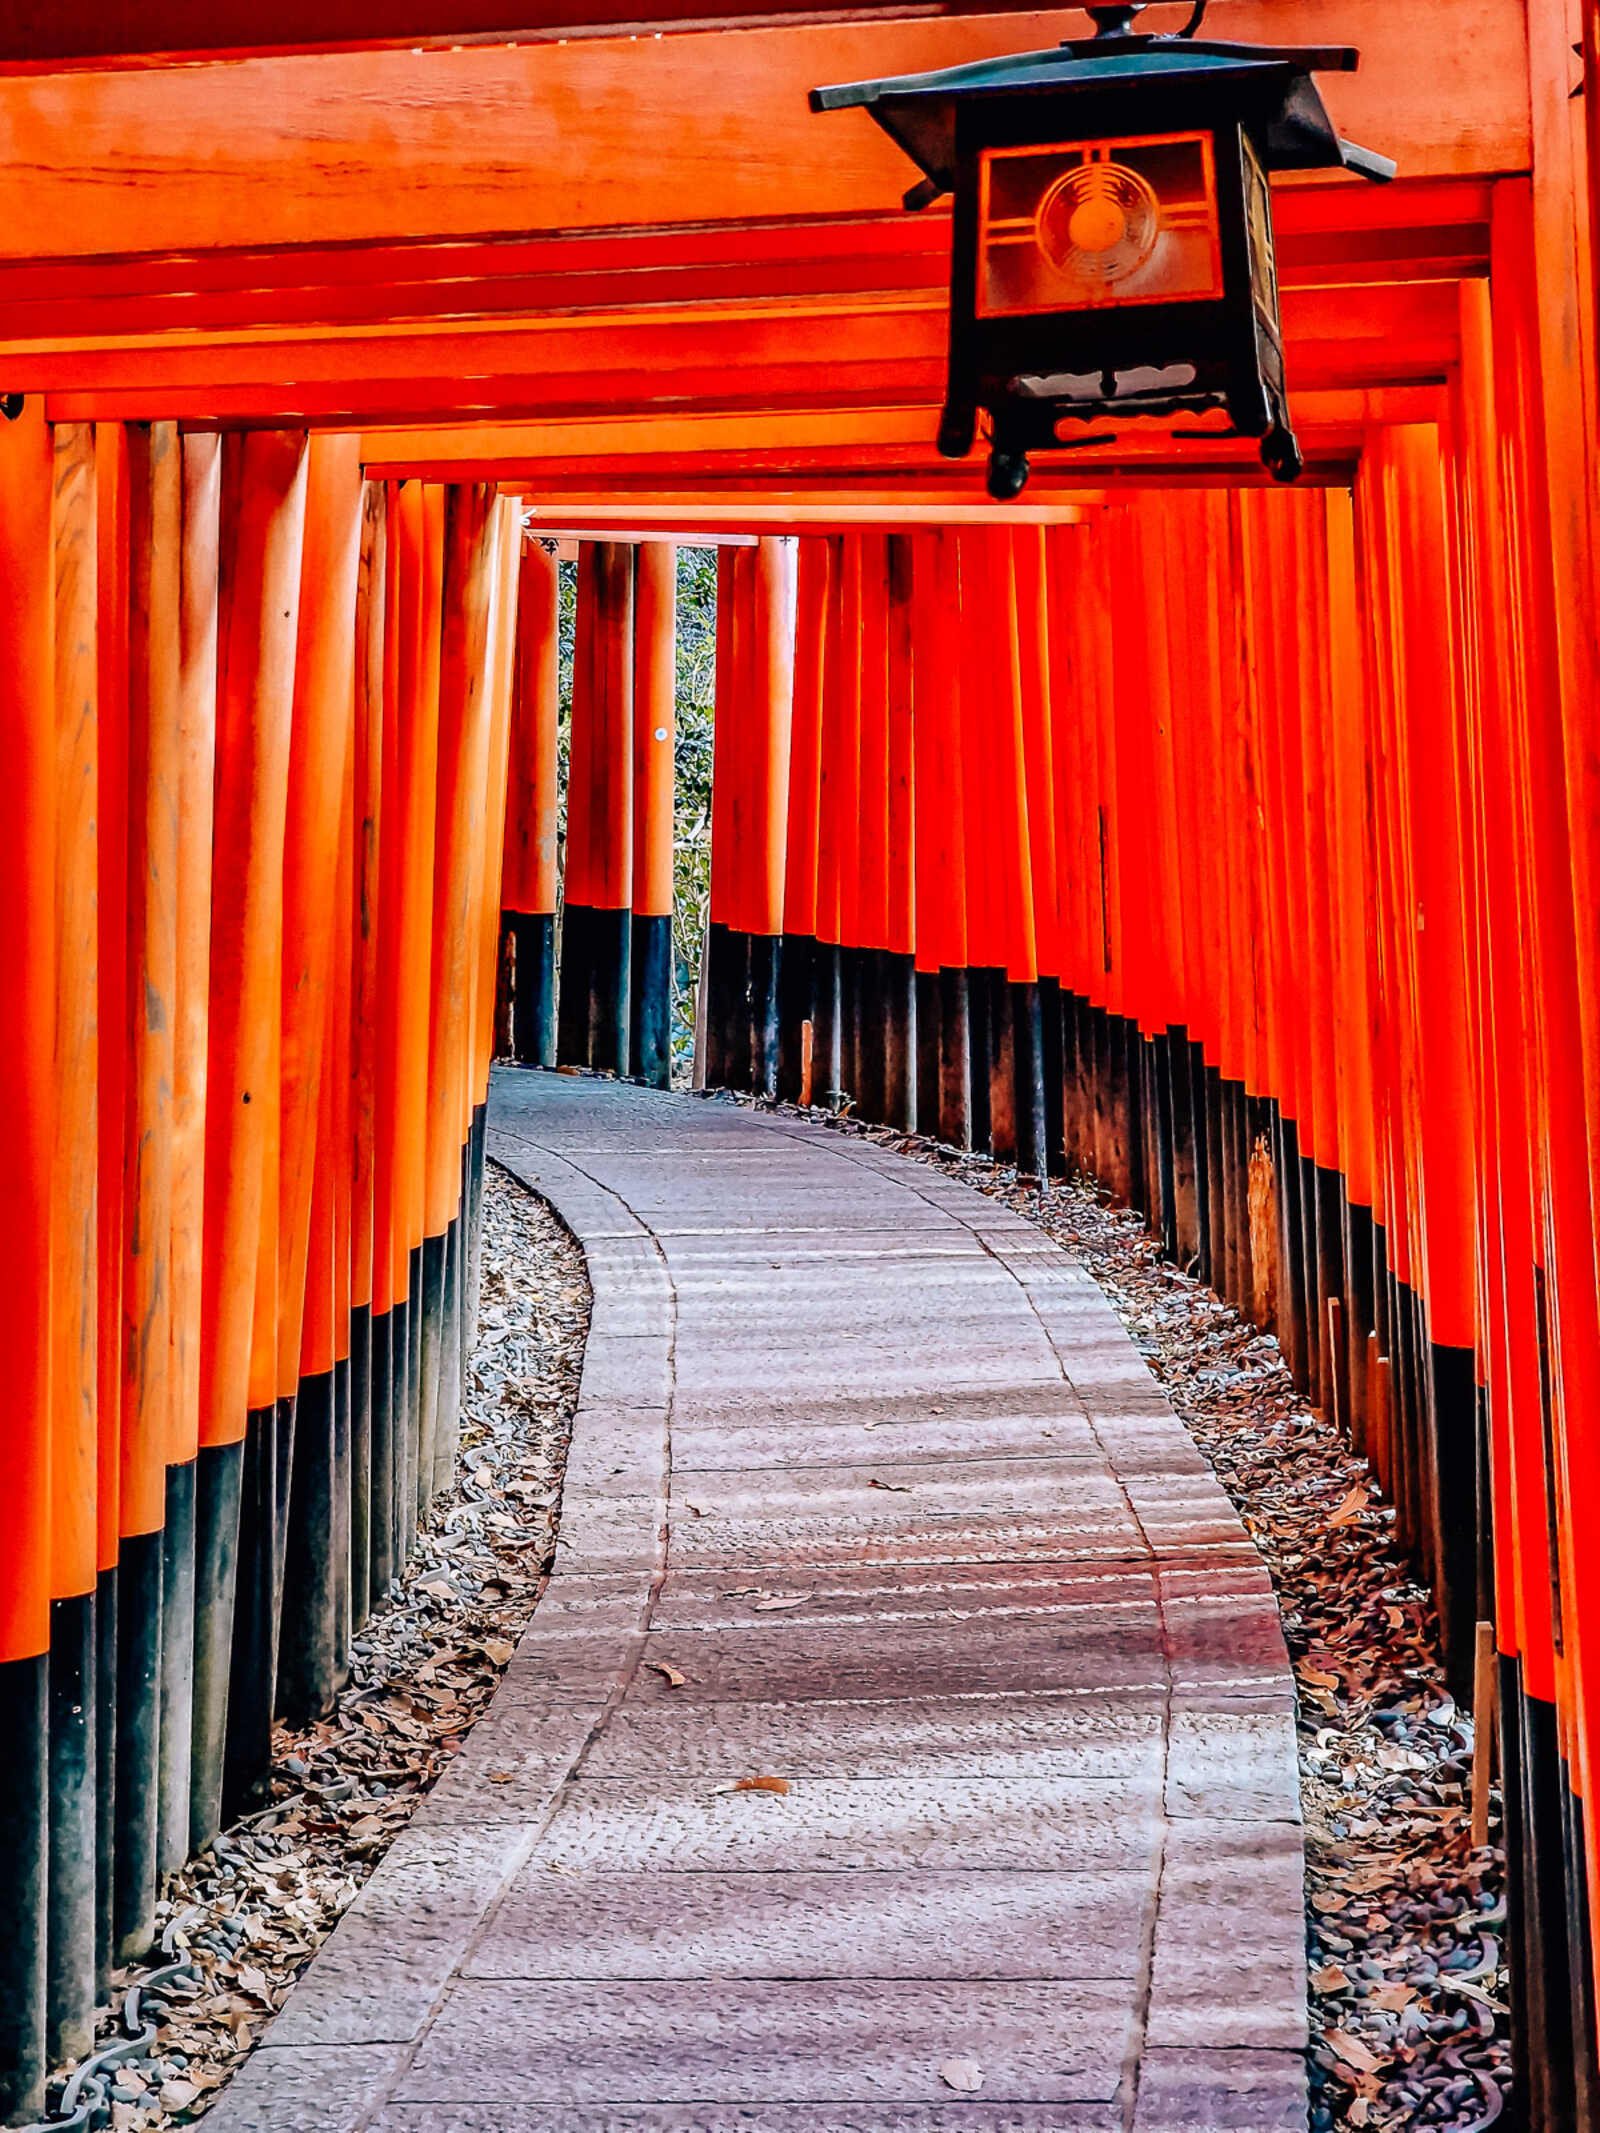 a curved pathway covered in orange arches - Japanese torii gates at the Fushimi Inari shrine in Kyoto